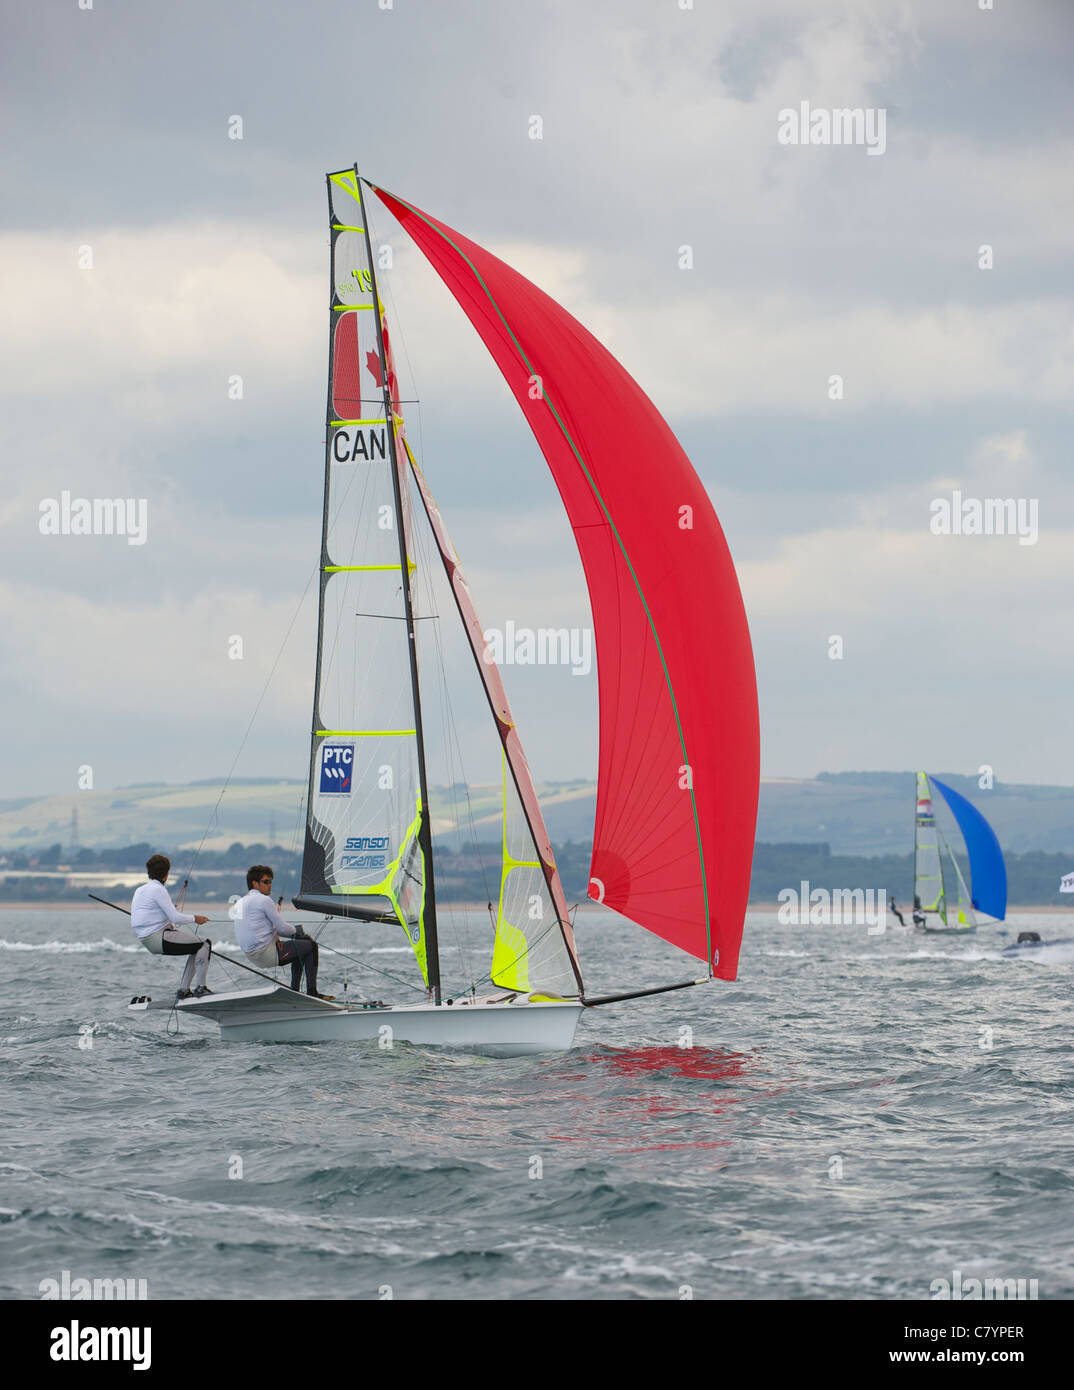 Gordon Cook and Hunter Lowden (CAN), Sailing Olympic Test Event, 49er men's skiff Class, Weymouth, England, Stock Photo